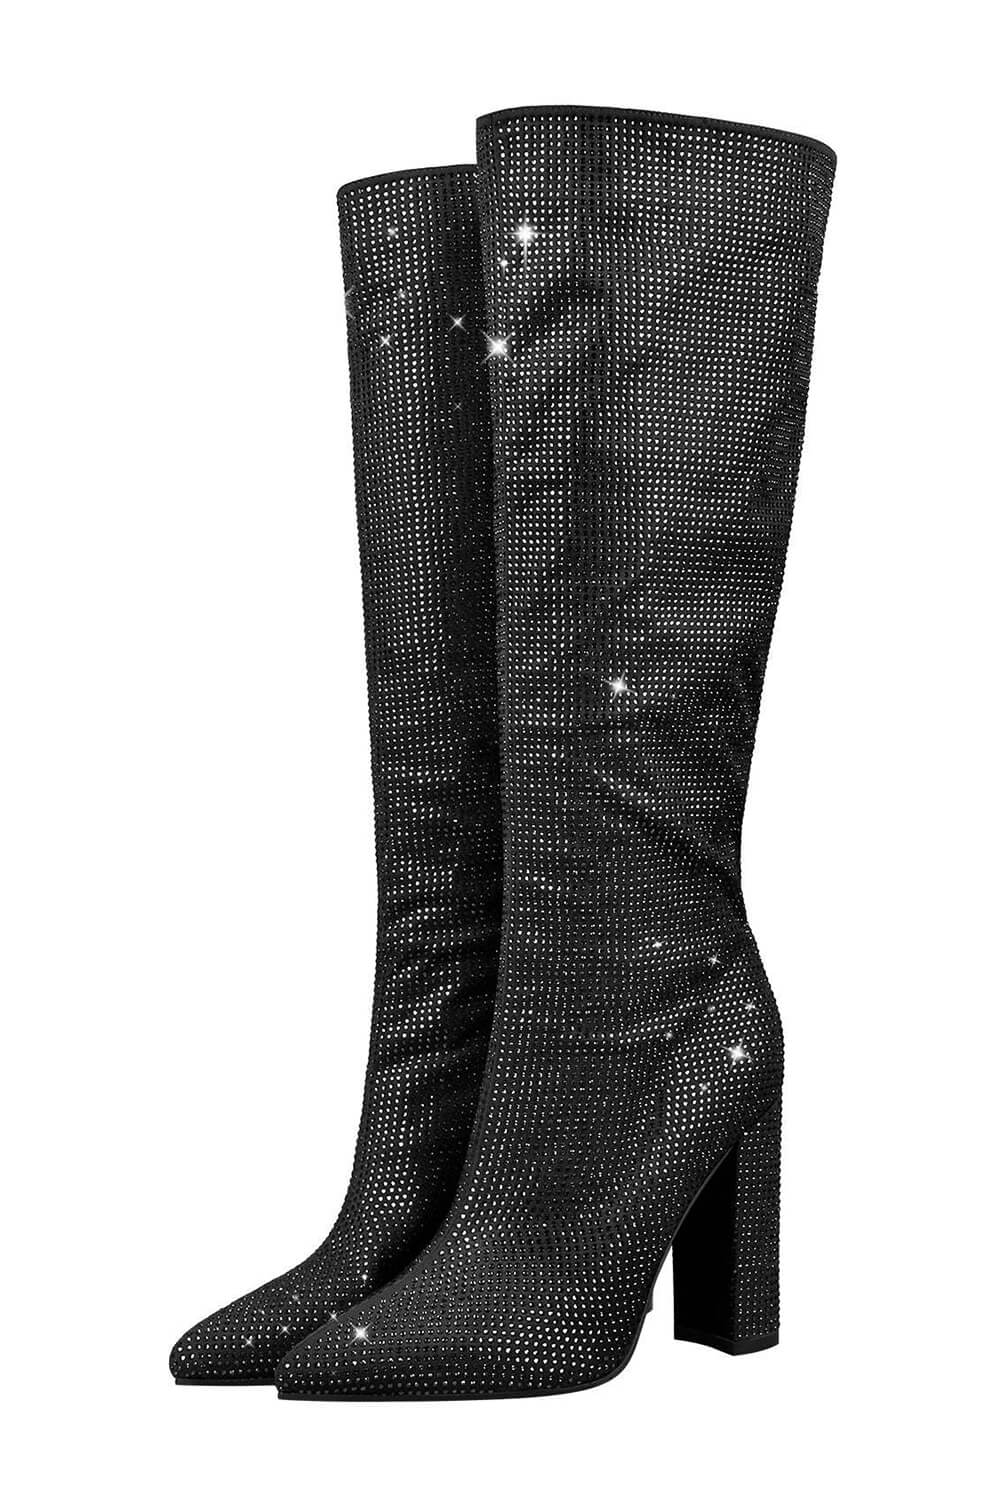 Glitter Knee High Pointed Toe Block Heeled Boots - Black